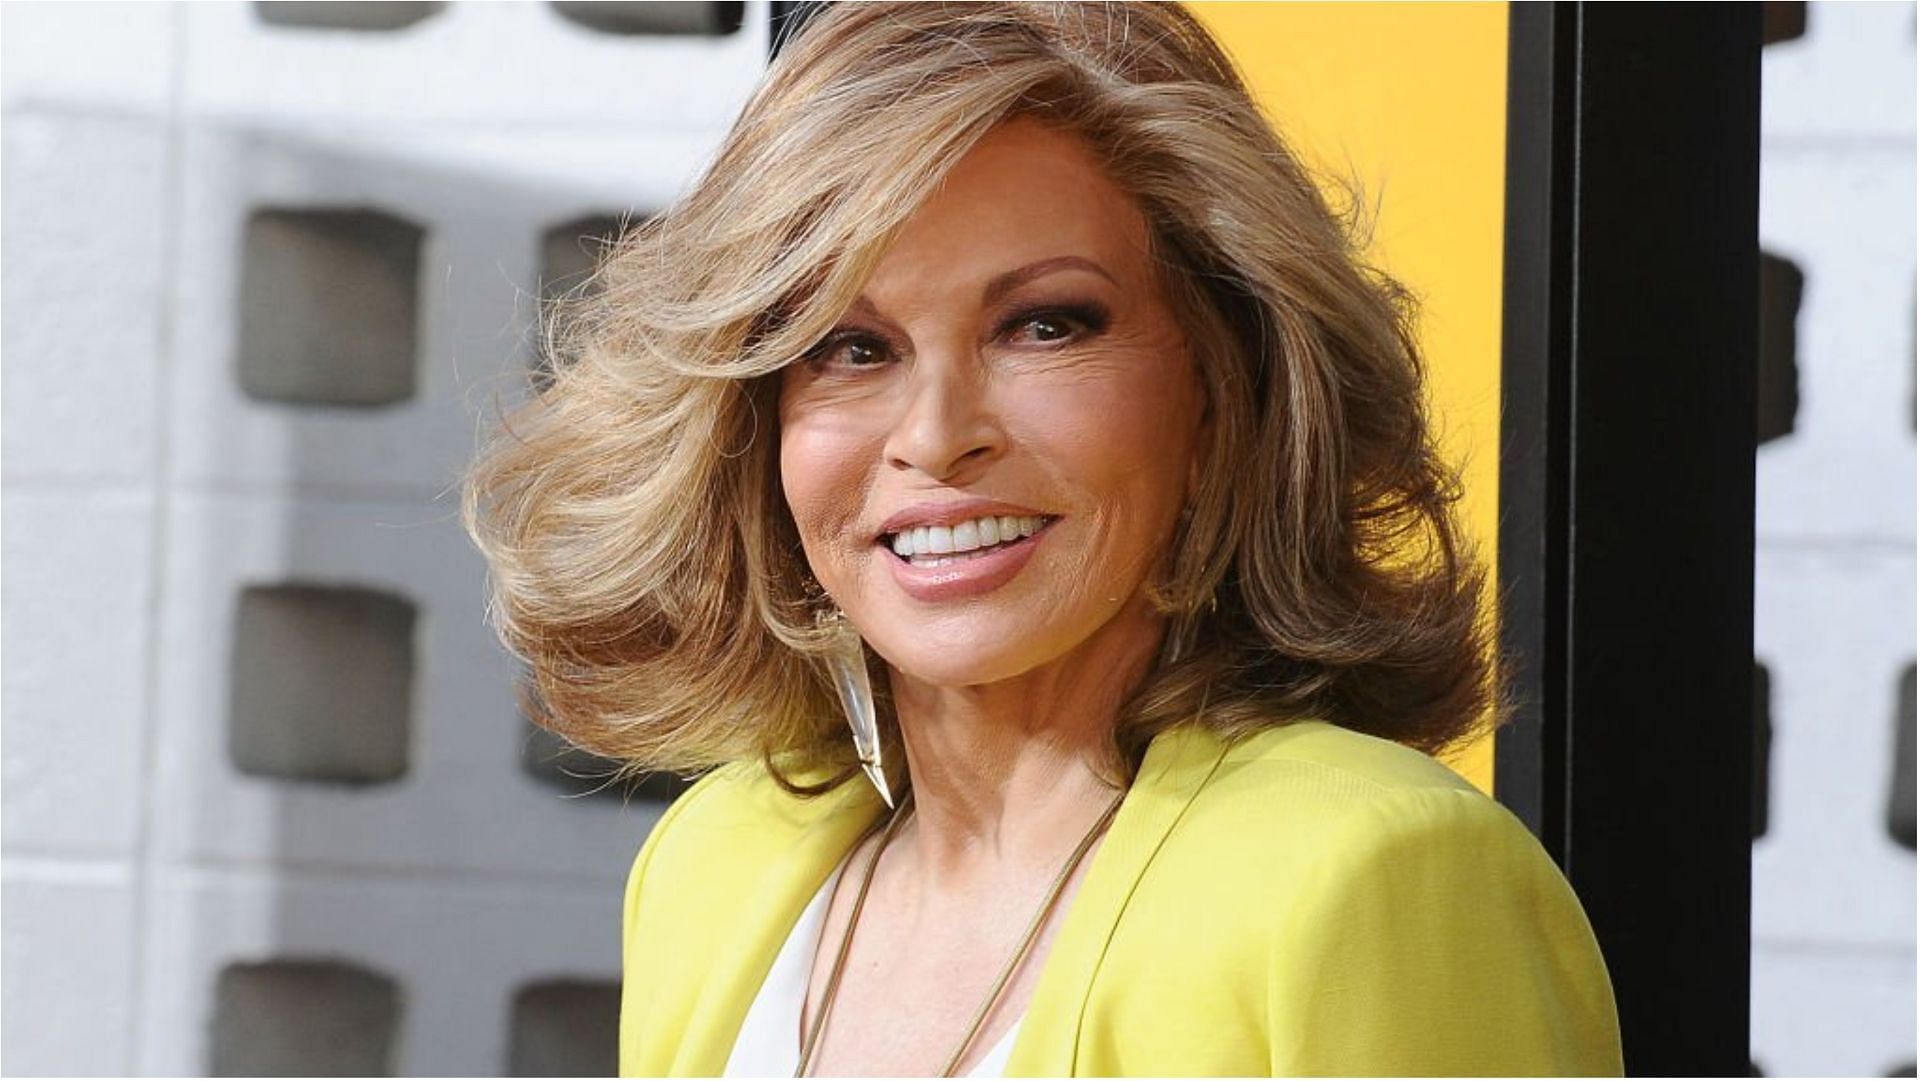 Raquel Welch earned a lot from her career in the entertainment industry in all these years (Image via Jason LaVeris/Getty Images)